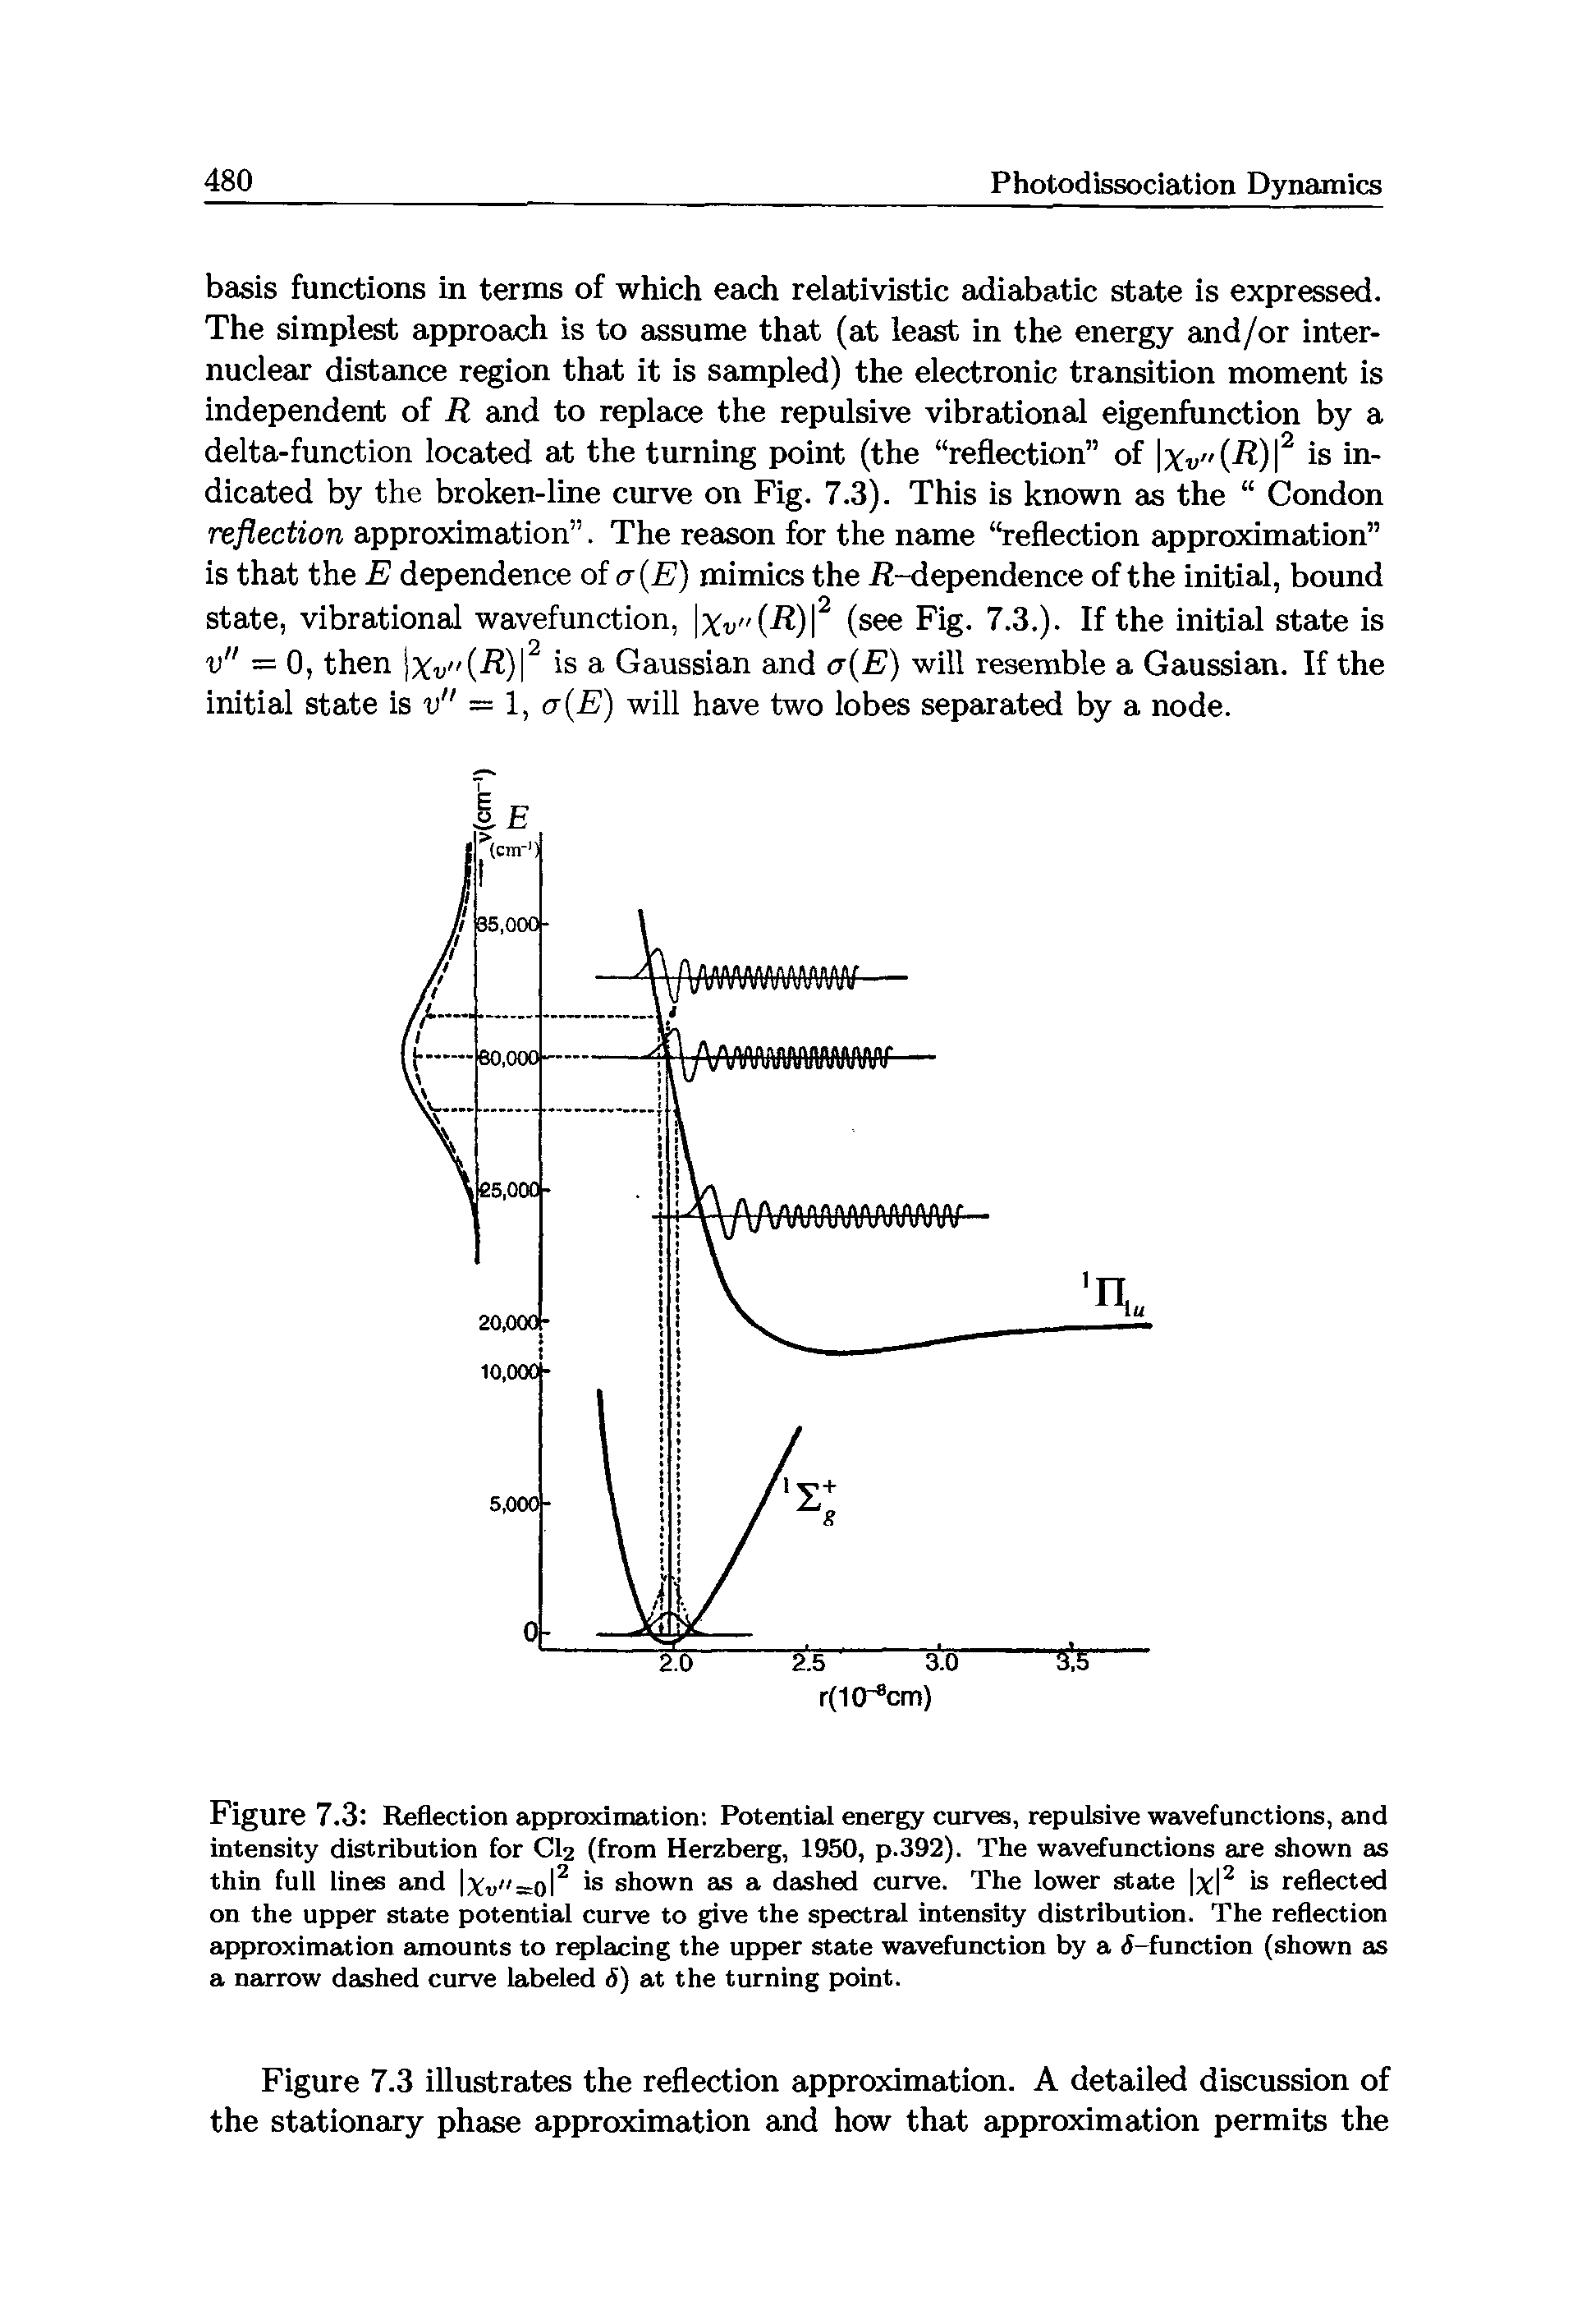 Figure 7.3 Reflection approximation Potential energy curves, repulsive wavefunctions, and intensity distribution for CI2 (from Herzberg, 1950, p.392). The wavefunctions are shown as thin full lines and Xv"=ol2 s shown as a dashed curve. The lower state x 2 is reflected on the upper state potential curve to give the spectral intensity distribution. The reflection approximation amounts to replacing the upper state wavefunction by a (5-function (shown as a narrow dashed curve labeled <5) at the turning point.